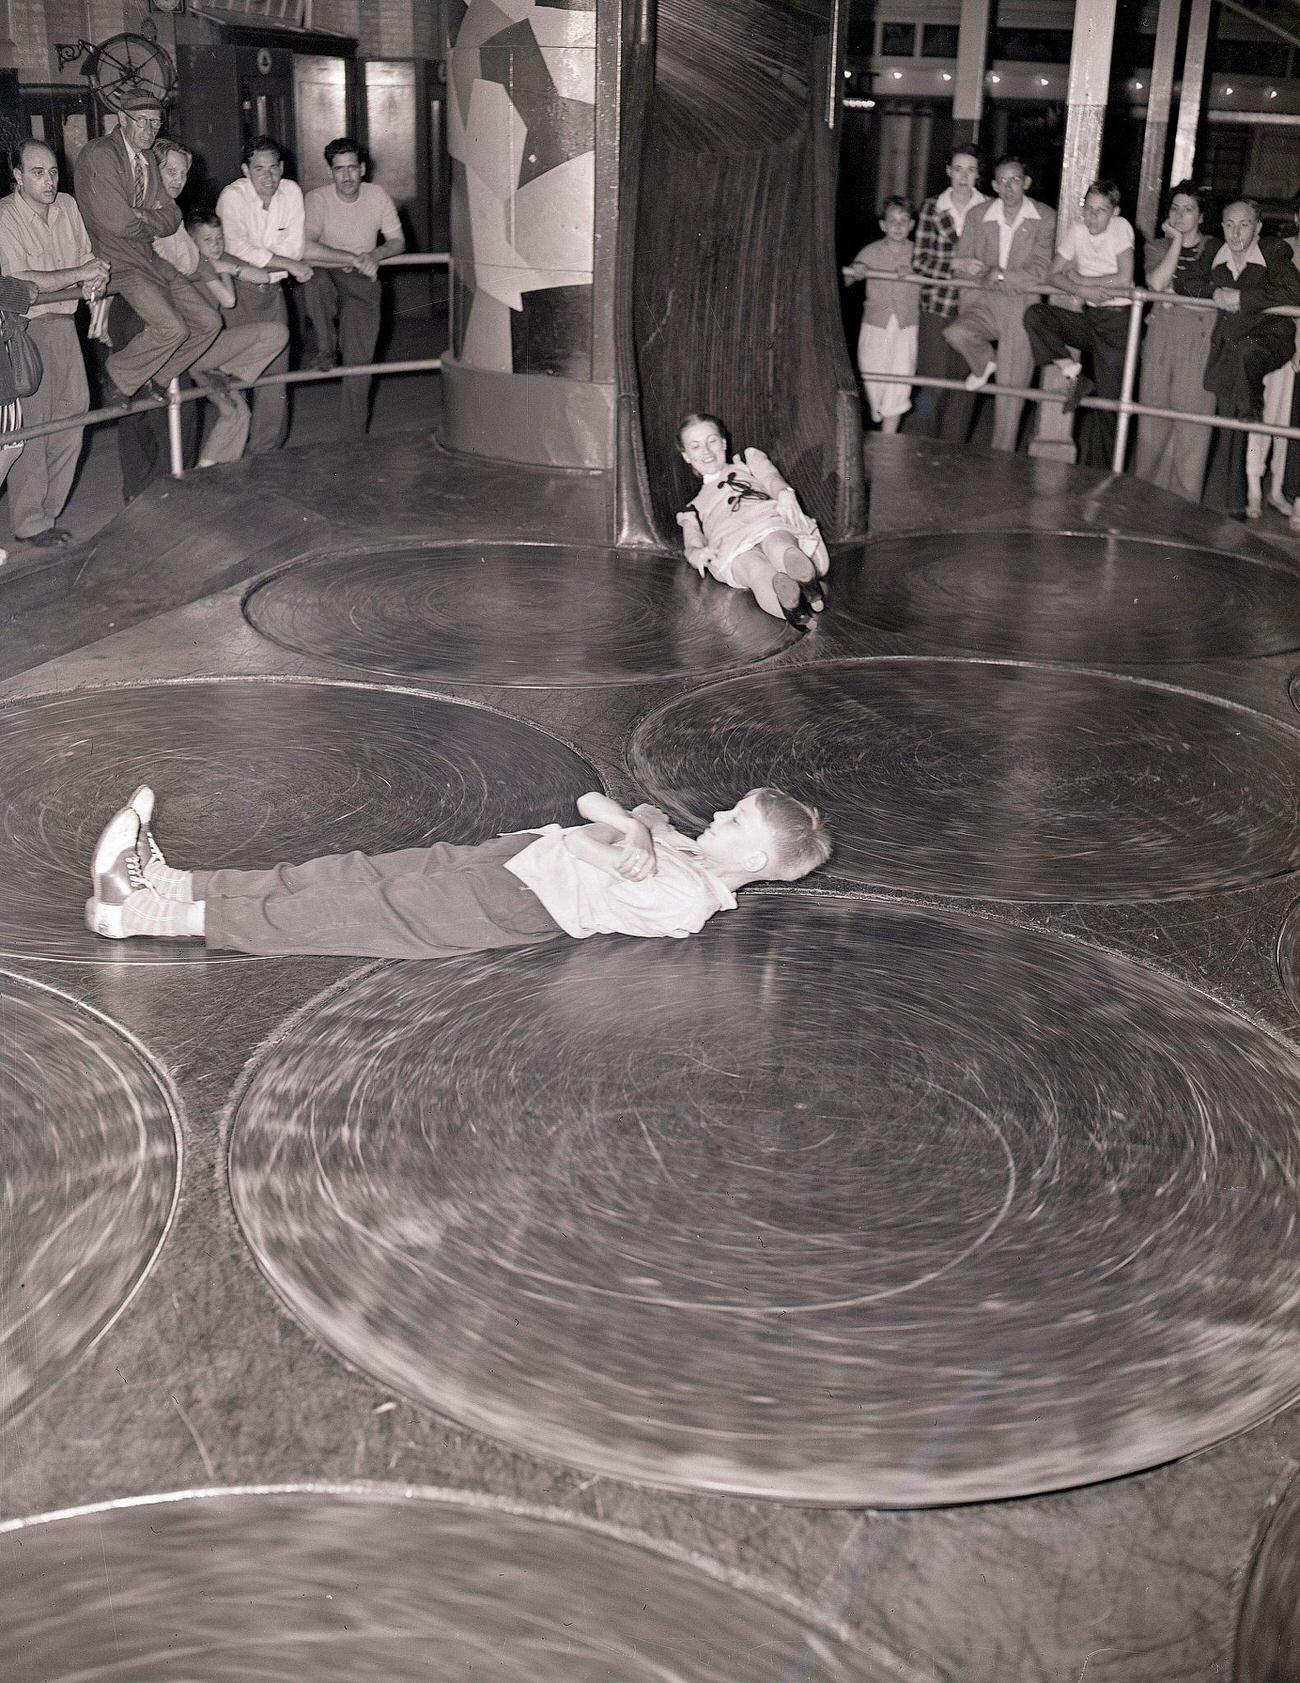 Children On Whirling Discs At Coney Island, 1946